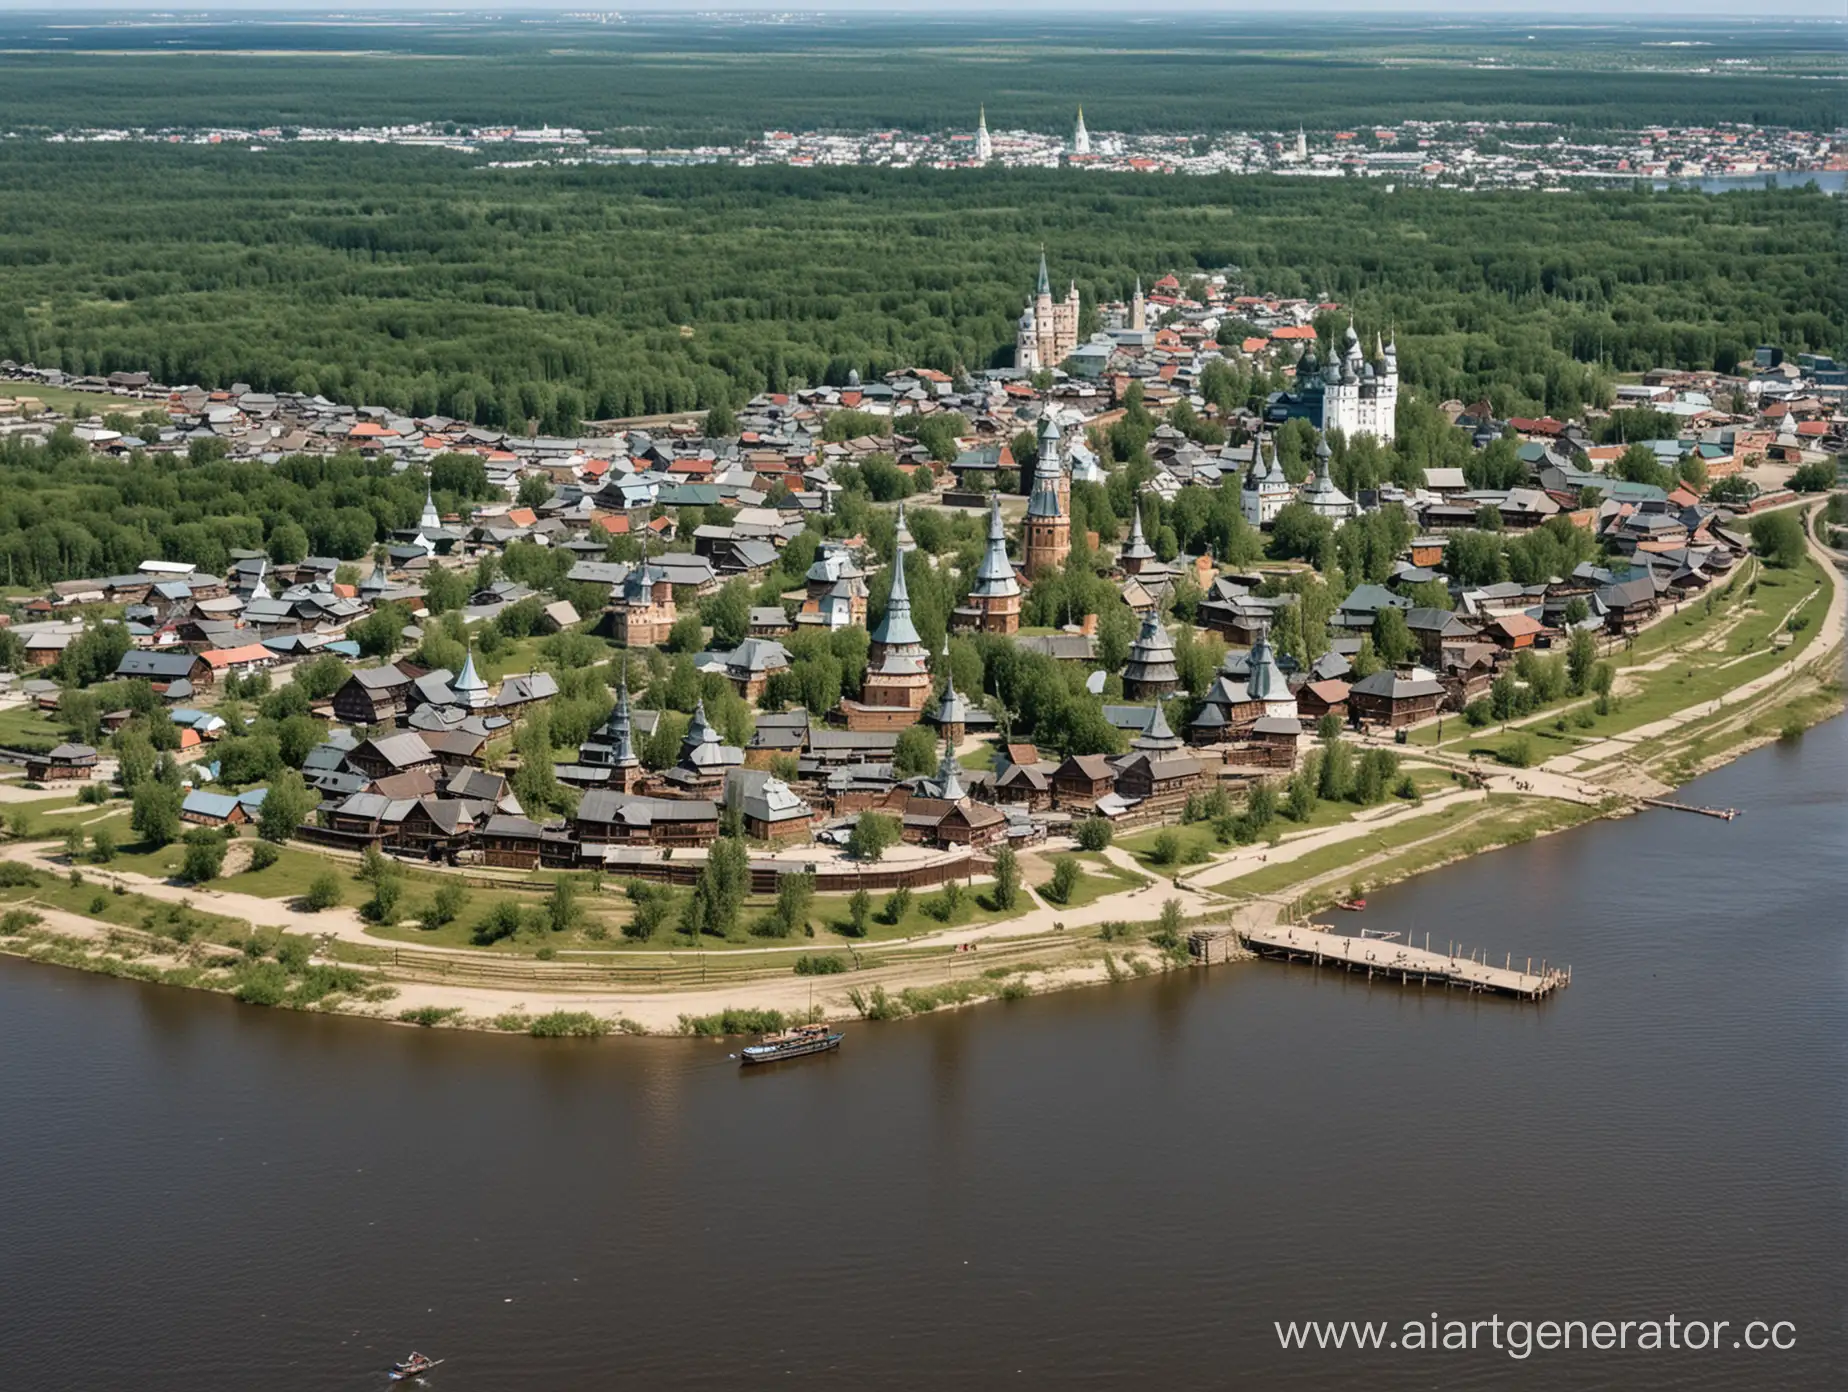 Ancient-Wooden-City-on-Volga-River-with-Kremlin-and-Fenced-Perimeter